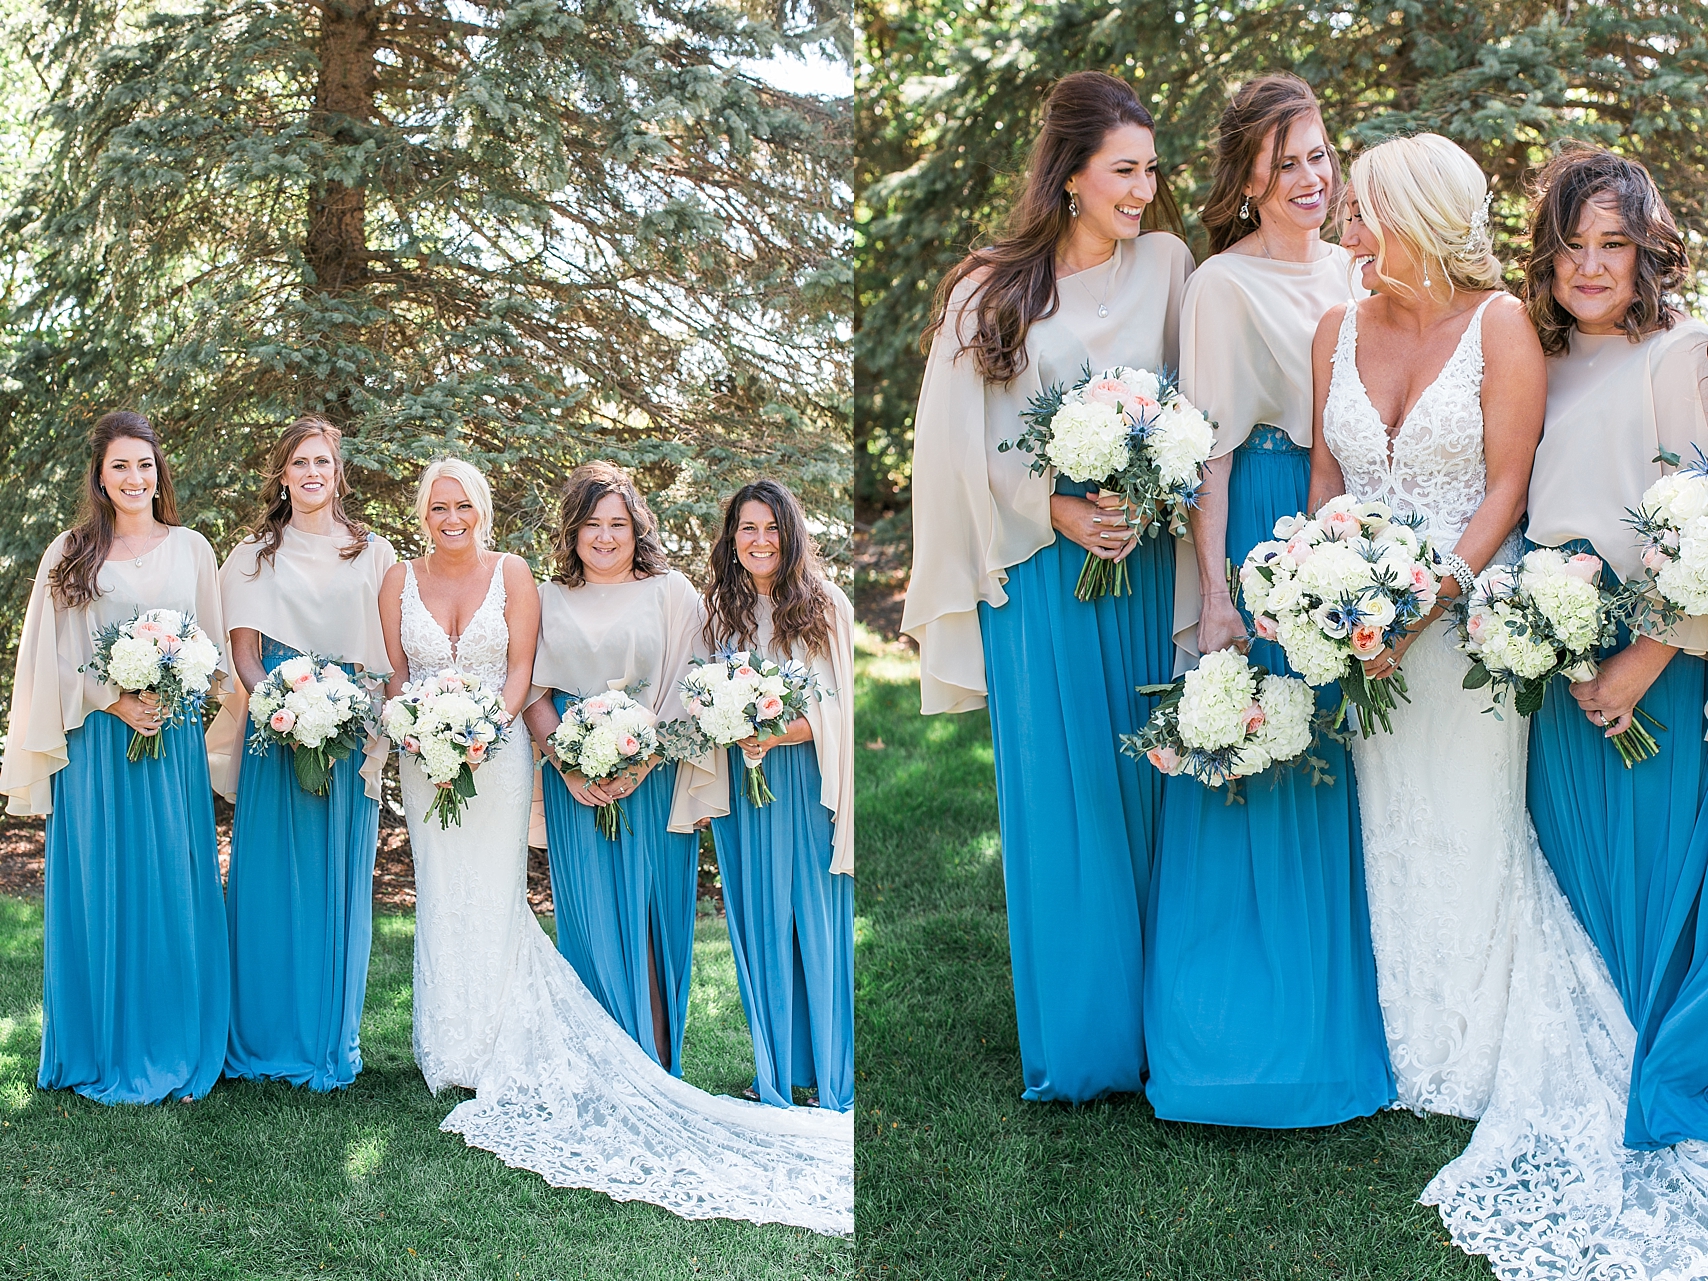 Bride and bridesmaids in blue dresses on wedding day at the Chart House Summer Wedding Lakeville Minnesota Minneapolis Wedding Photographer Mallory Kiesow